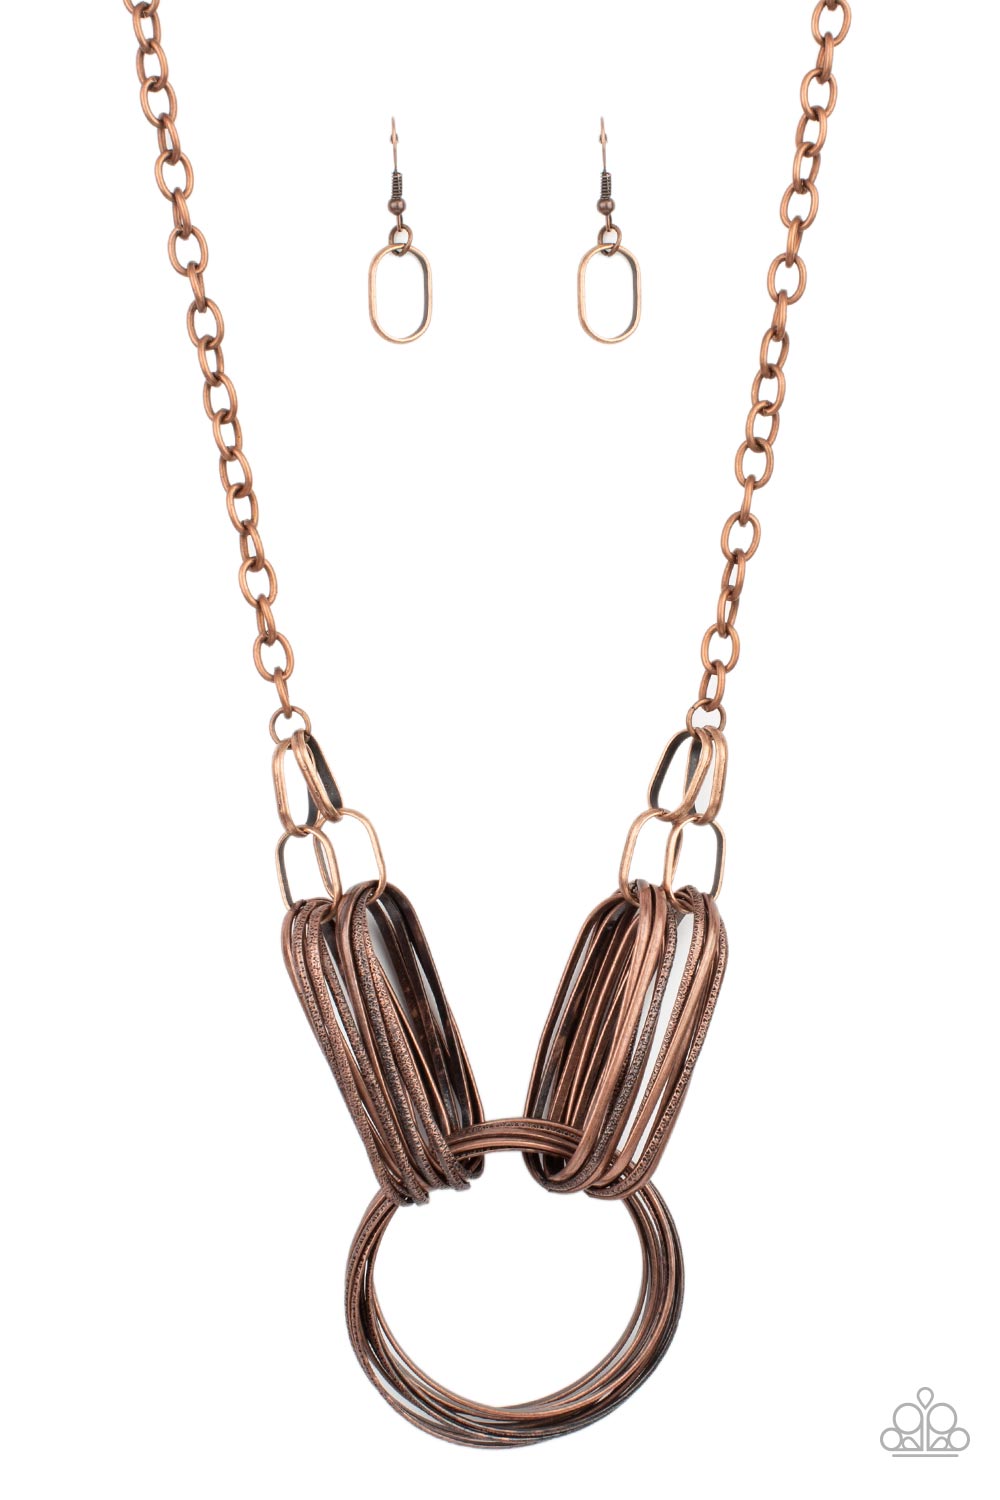 Lip Sync Links Copper Necklace - Paparazzi Accessories  Layers of oblong copper links attach to a collection of oversized antiqued copper rings creating a dramatic centerpiece. Attached to a copper chain, the rustic links create an unconventionally edgy statement below the collar. Features an adjustable clasp closure.  Sold as one individual necklace. Includes one pair of matching earrings.